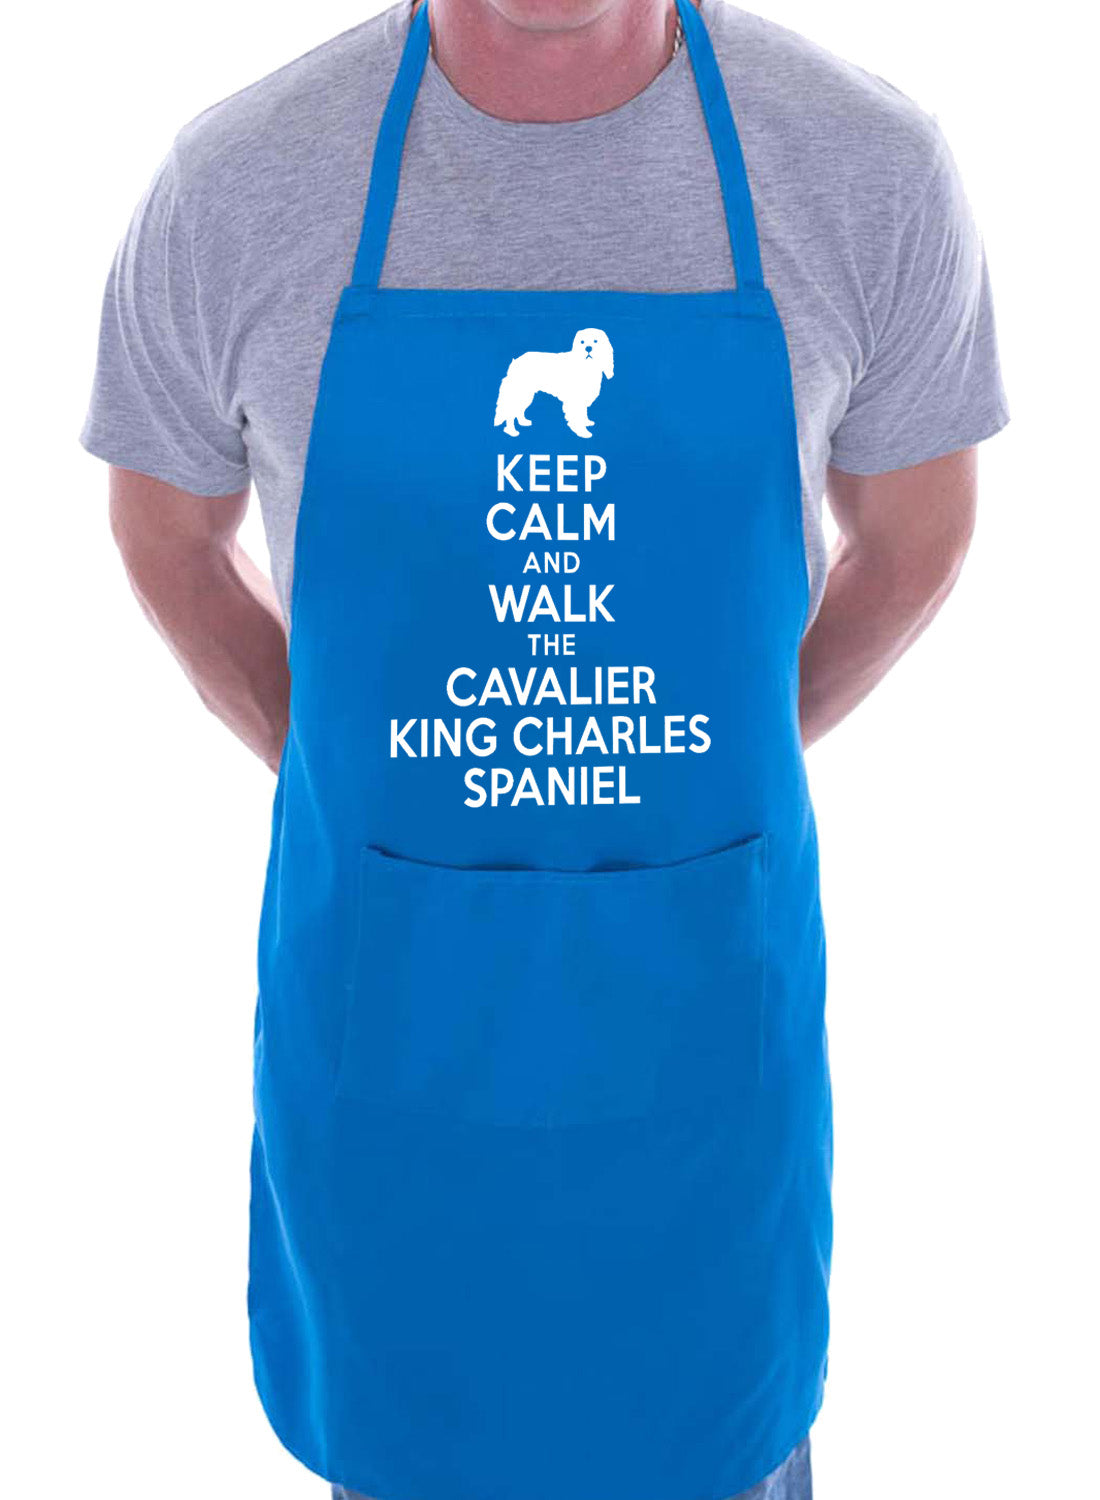 Keep Calm and Walk Cavalier King Charles Funny BBQ Novelty Cooking Apron